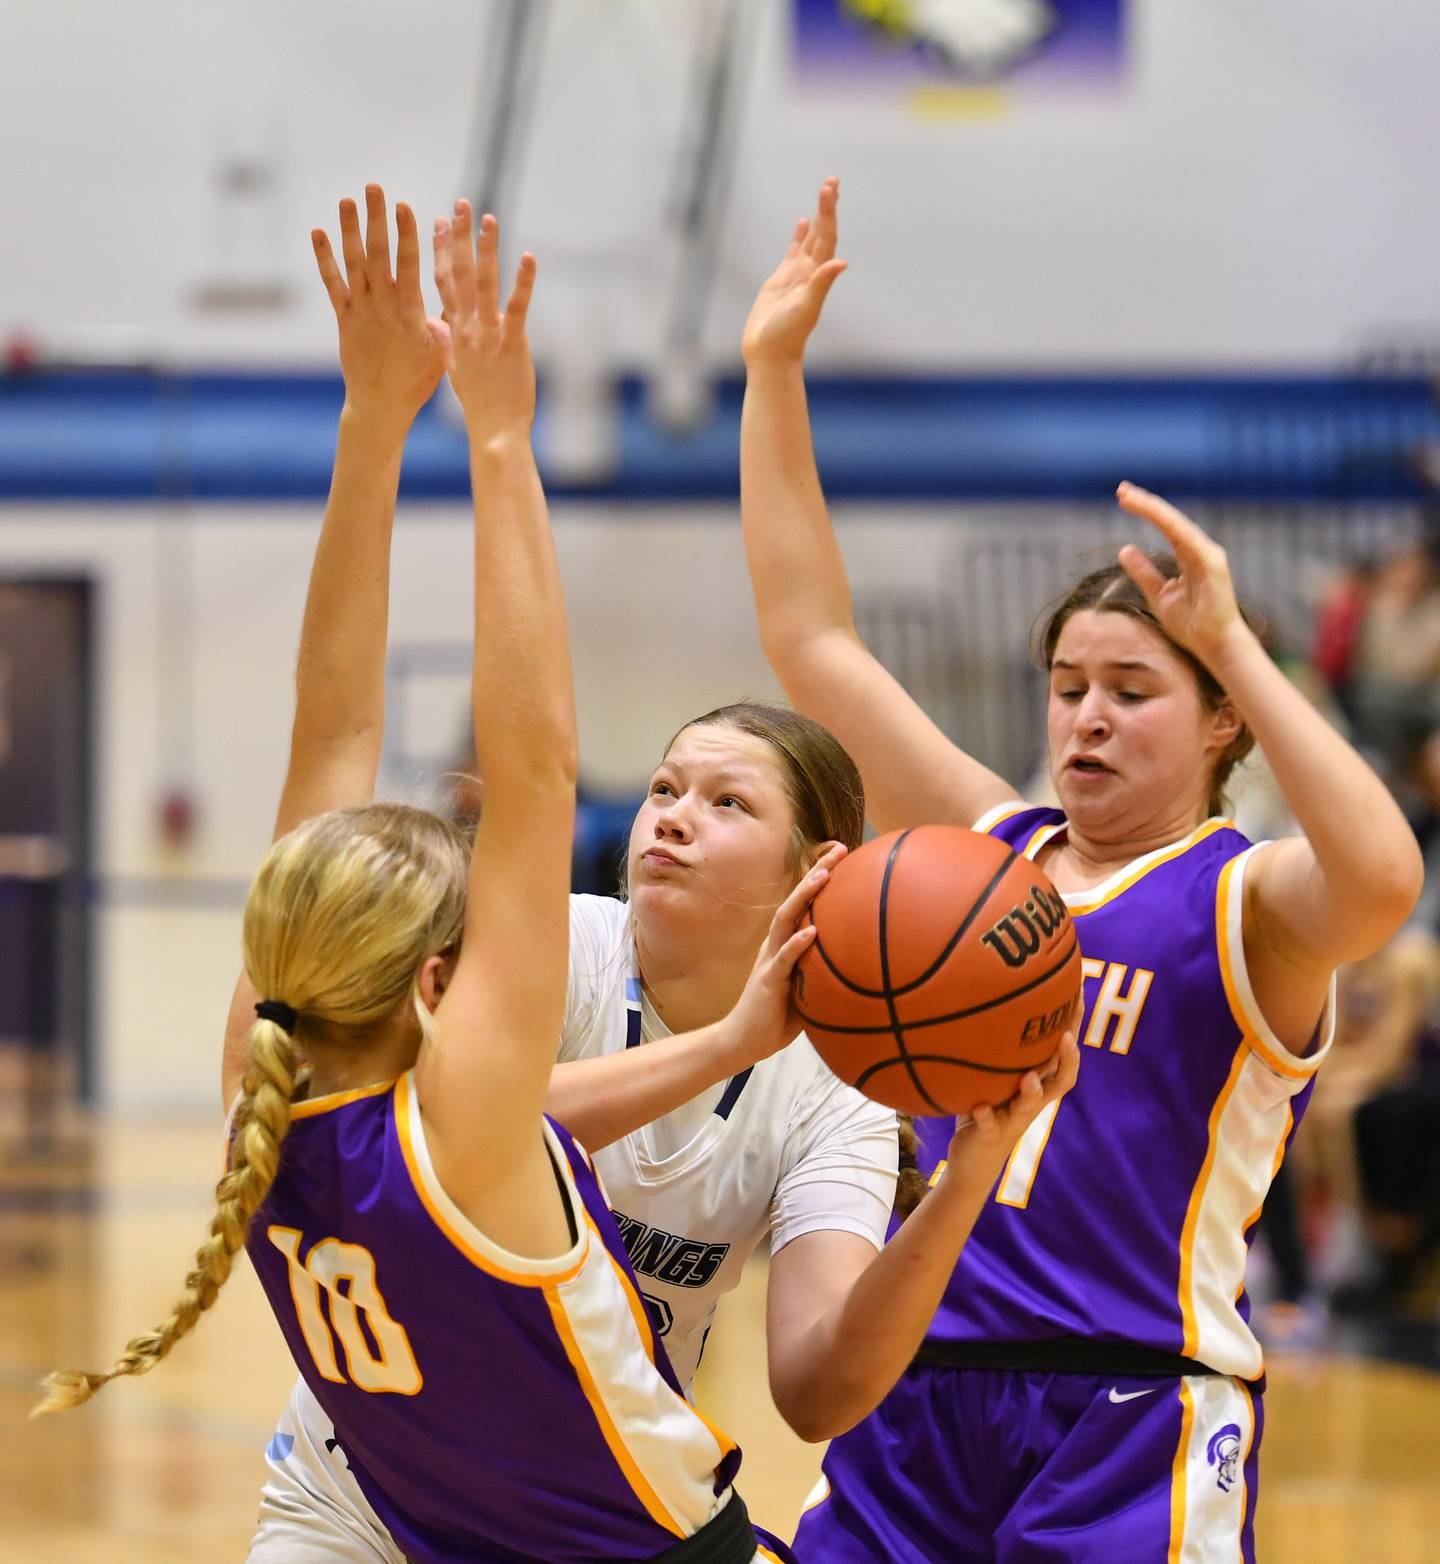 Downers Grove South's Megan Ganschow (middle) looks to shoot while double teamed by Downers Grove North's Hope Sebek (10) and Annie Stephens during a crosstown game on Dec. 17, 2022 at Downers Grove South High School in Downers Grove .